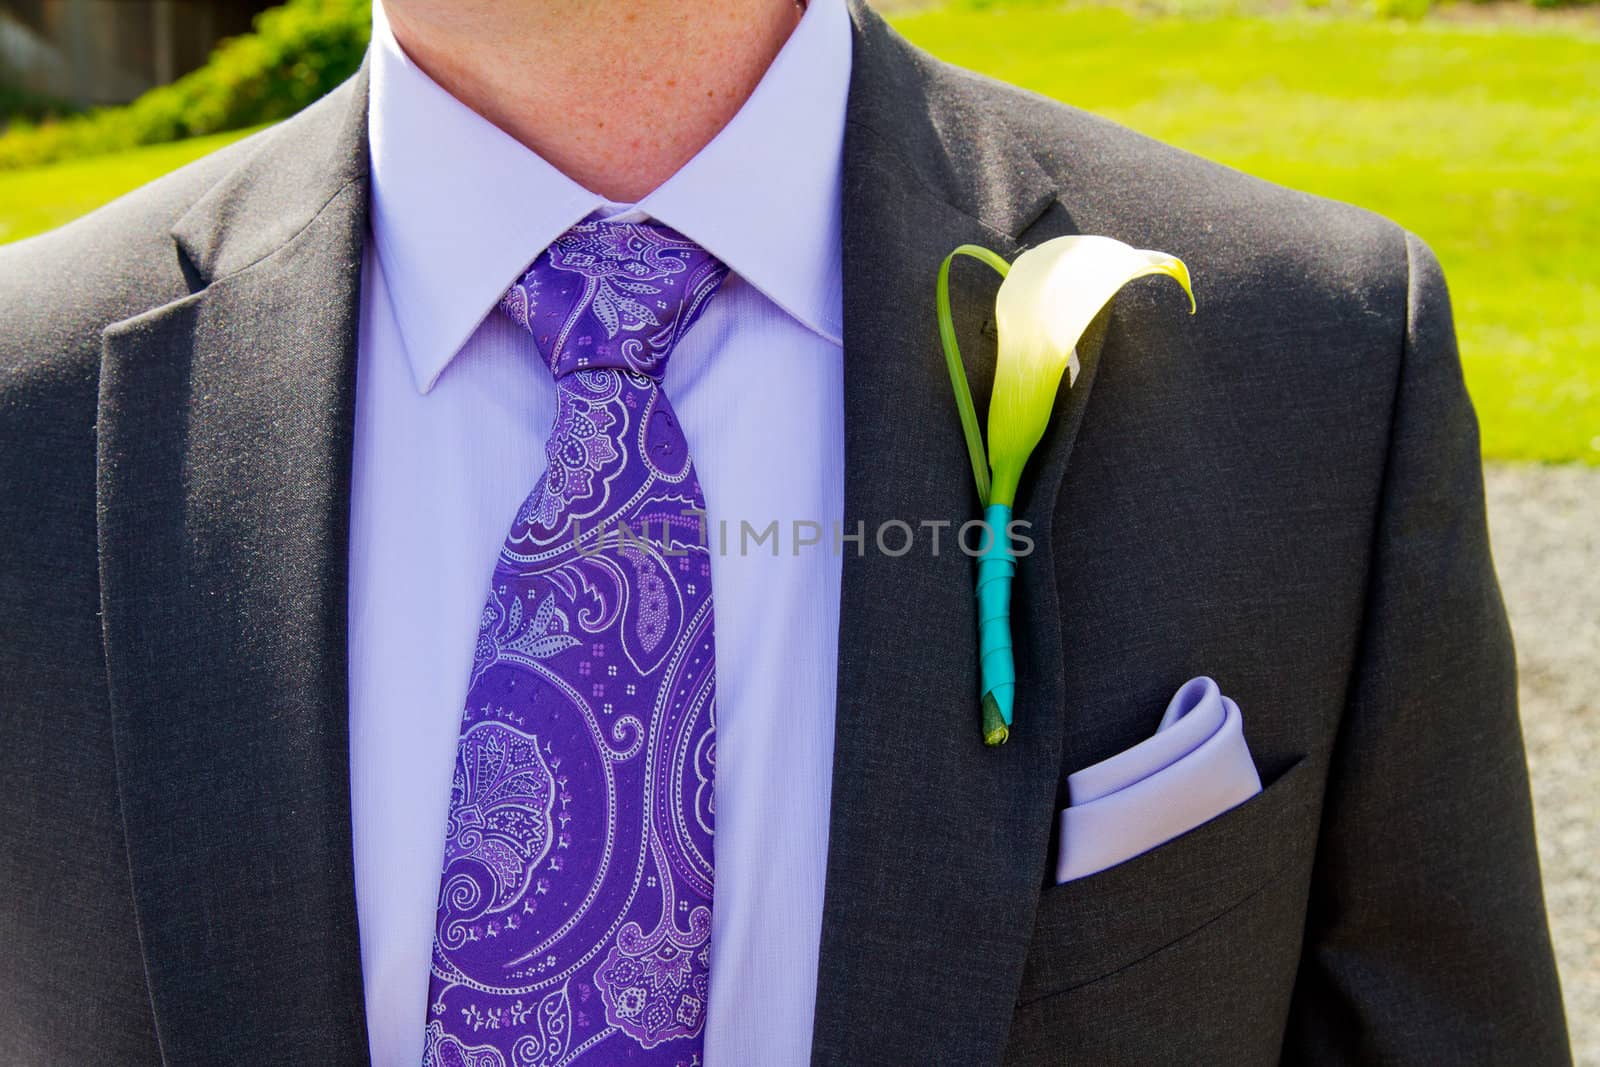 A groom and his boutonniere on his wedding day. He is wearing a suit with a single flower on the lapel of his jacket.